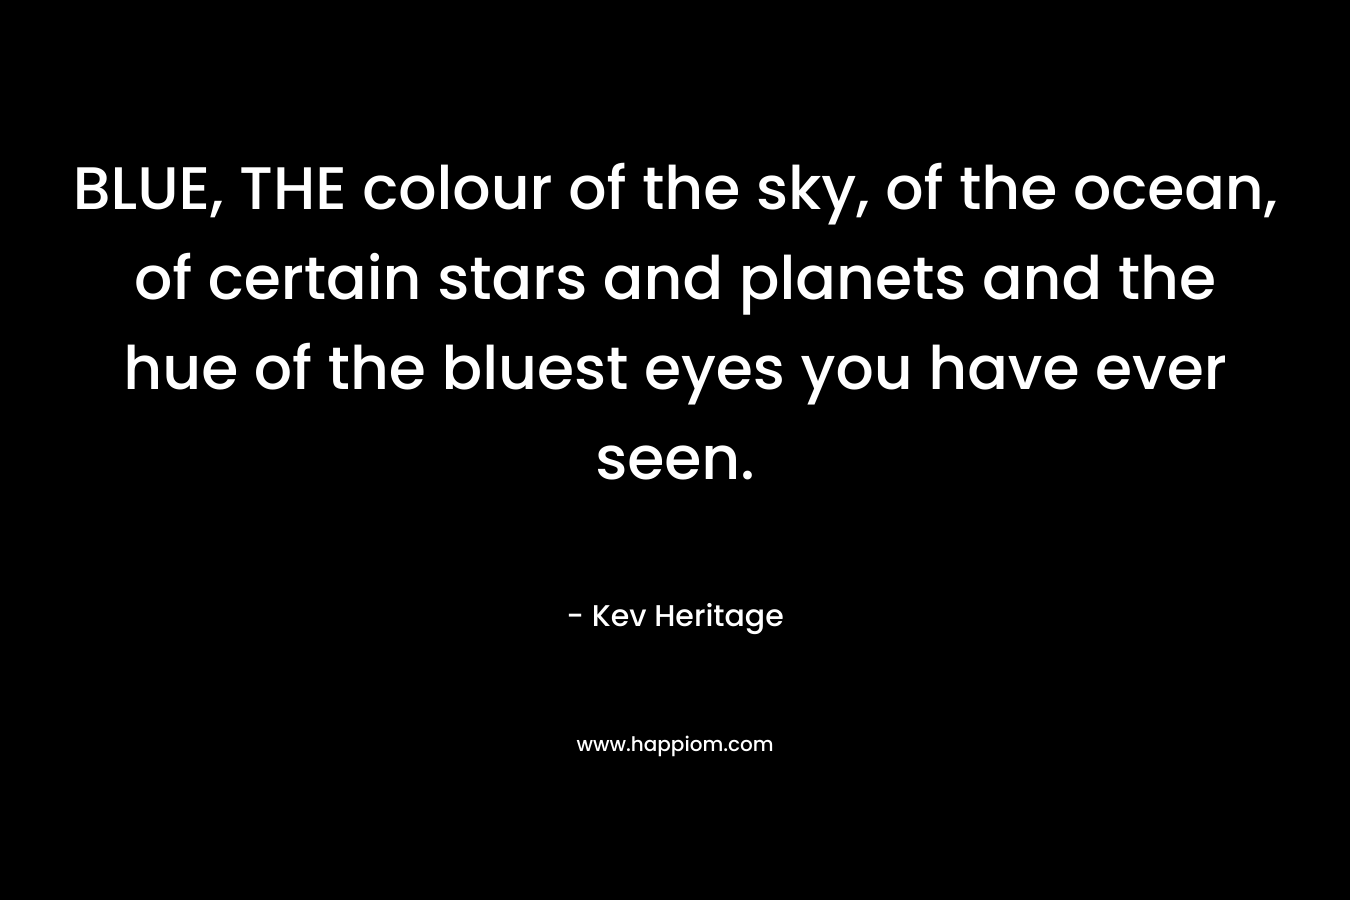 BLUE, THE colour of the sky, of the ocean, of certain stars and planets and the hue of the bluest eyes you have ever seen. – Kev Heritage